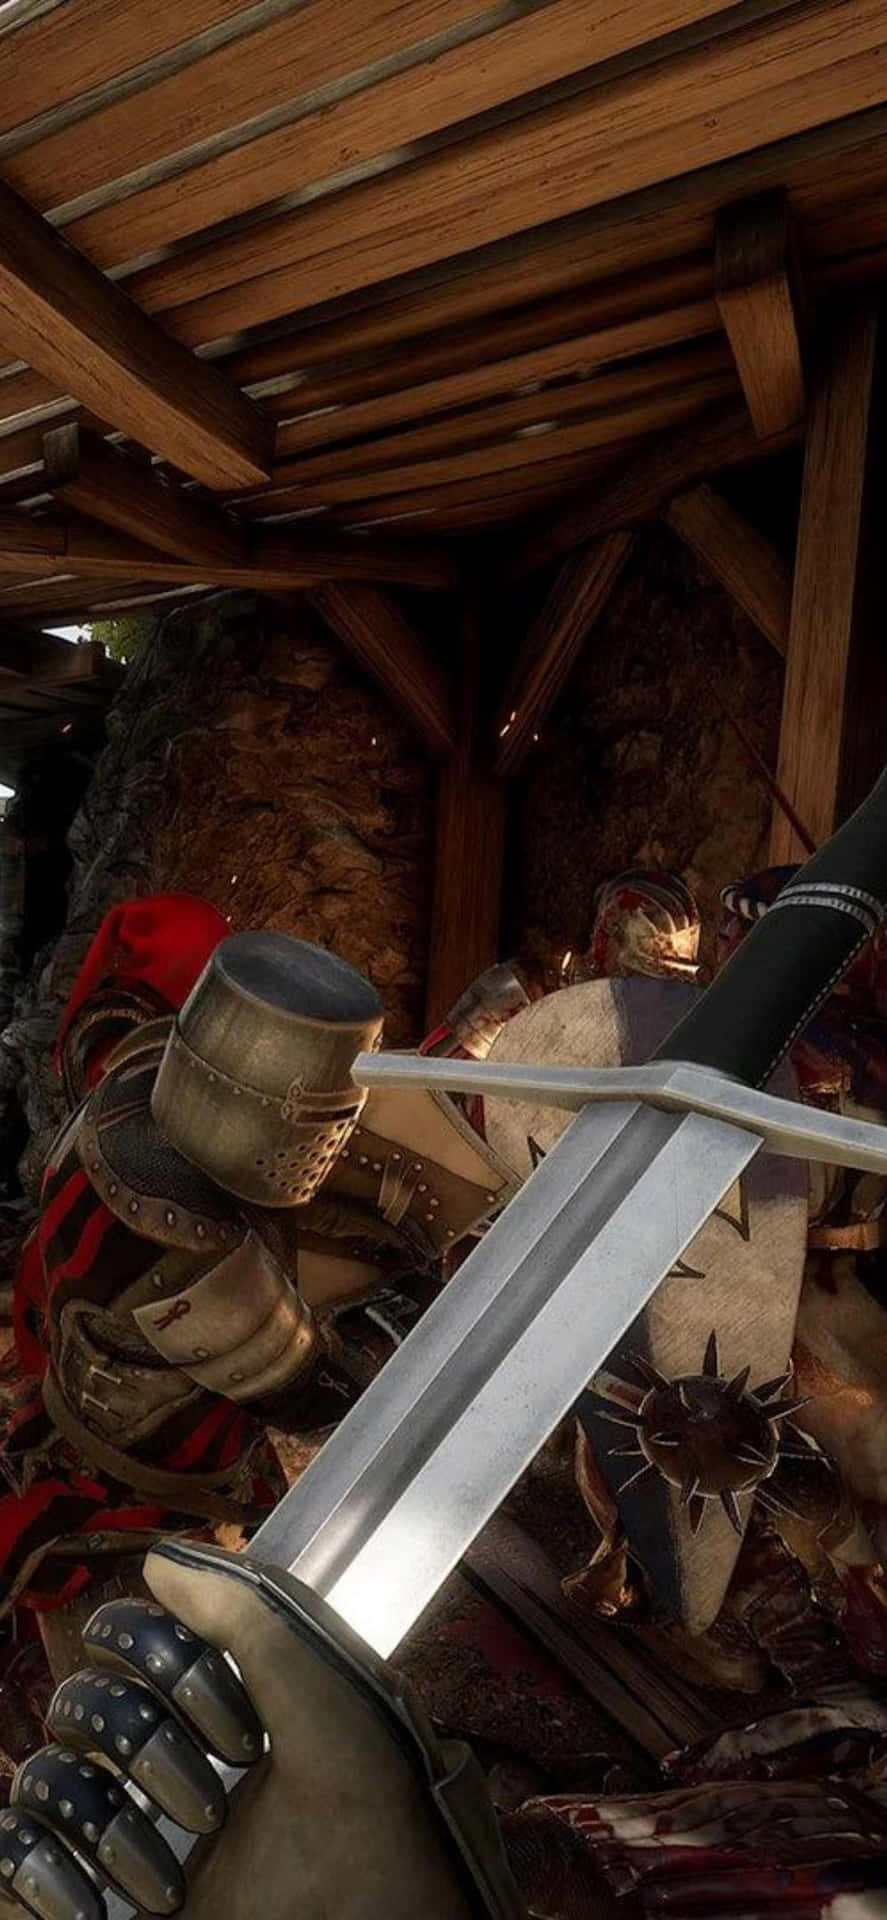 Become a master swordsman with Iphone XS Max Mordhau